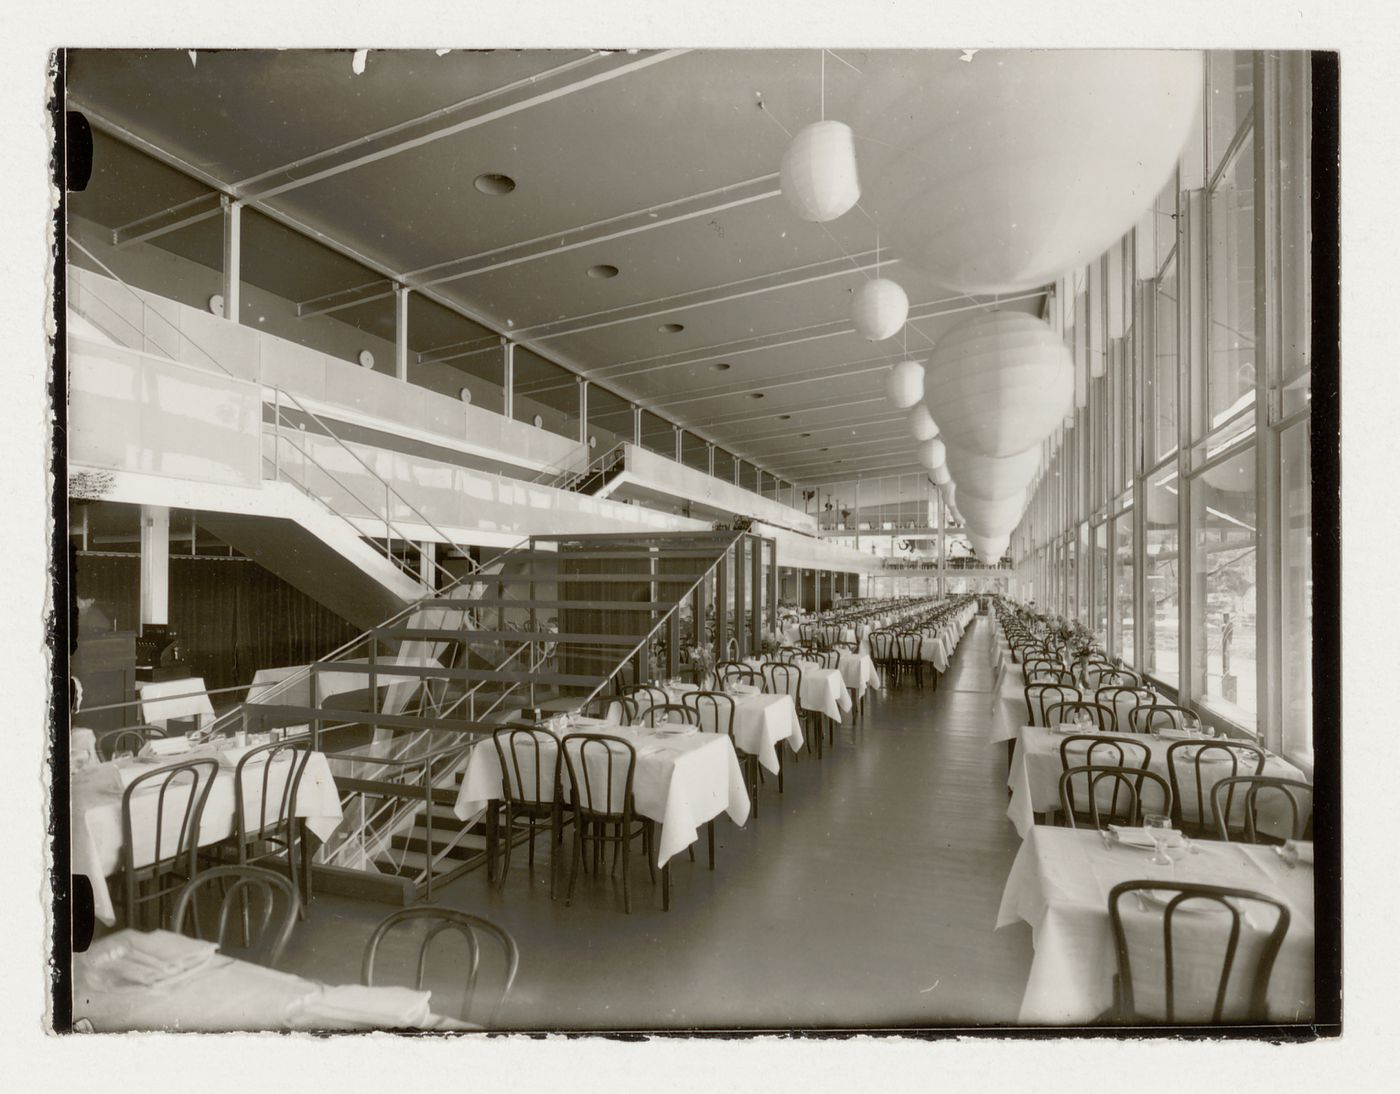 Interior view of Paradise Restaurant at the Stockholm Exhibition of 1930 showing tables, chairs and ceiling fixtures, Stockholm